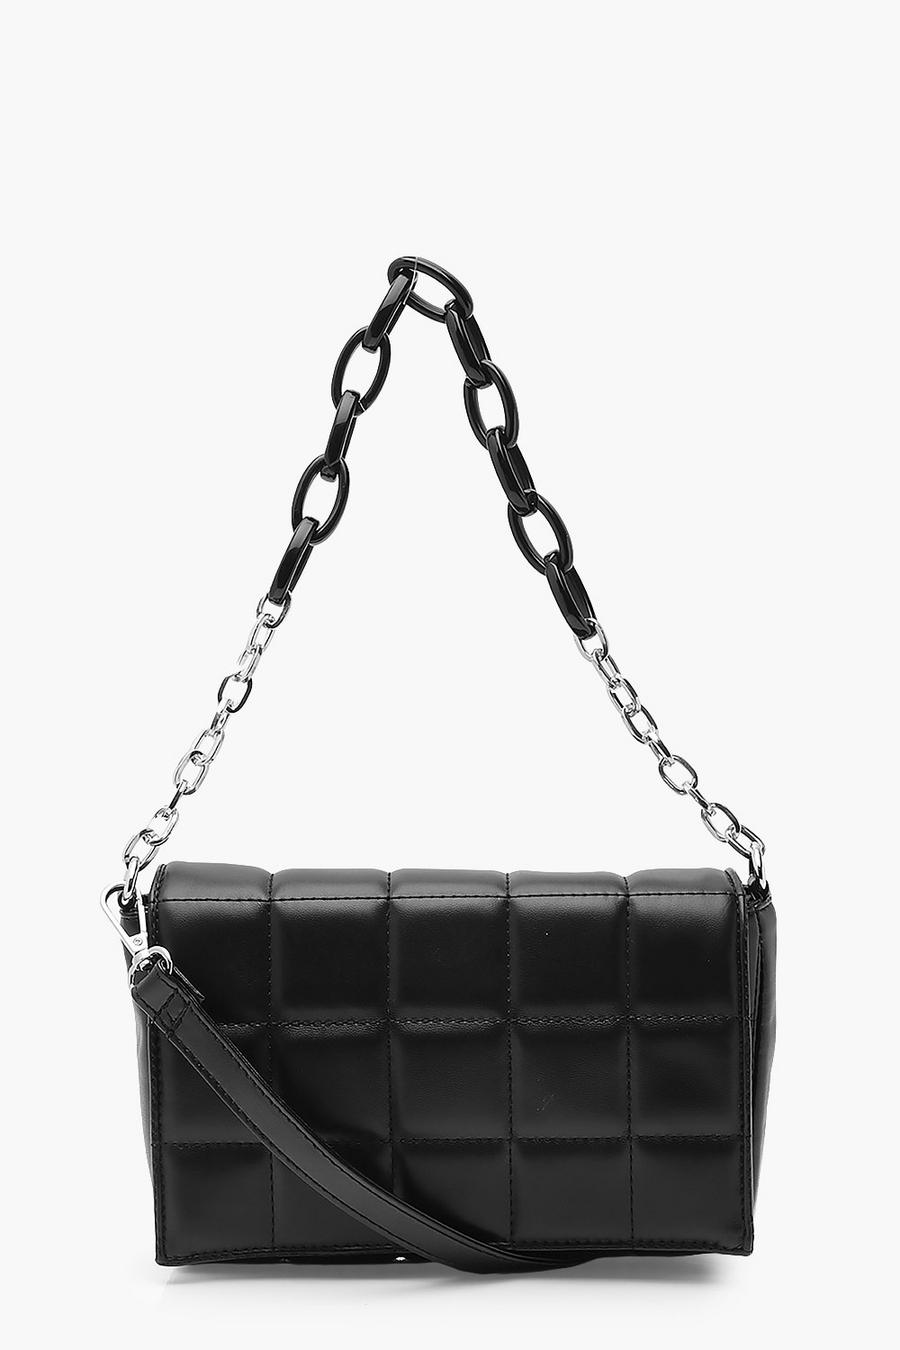 PU Quilted Cross Body Bag With Chunky Chain | Boohoo UK